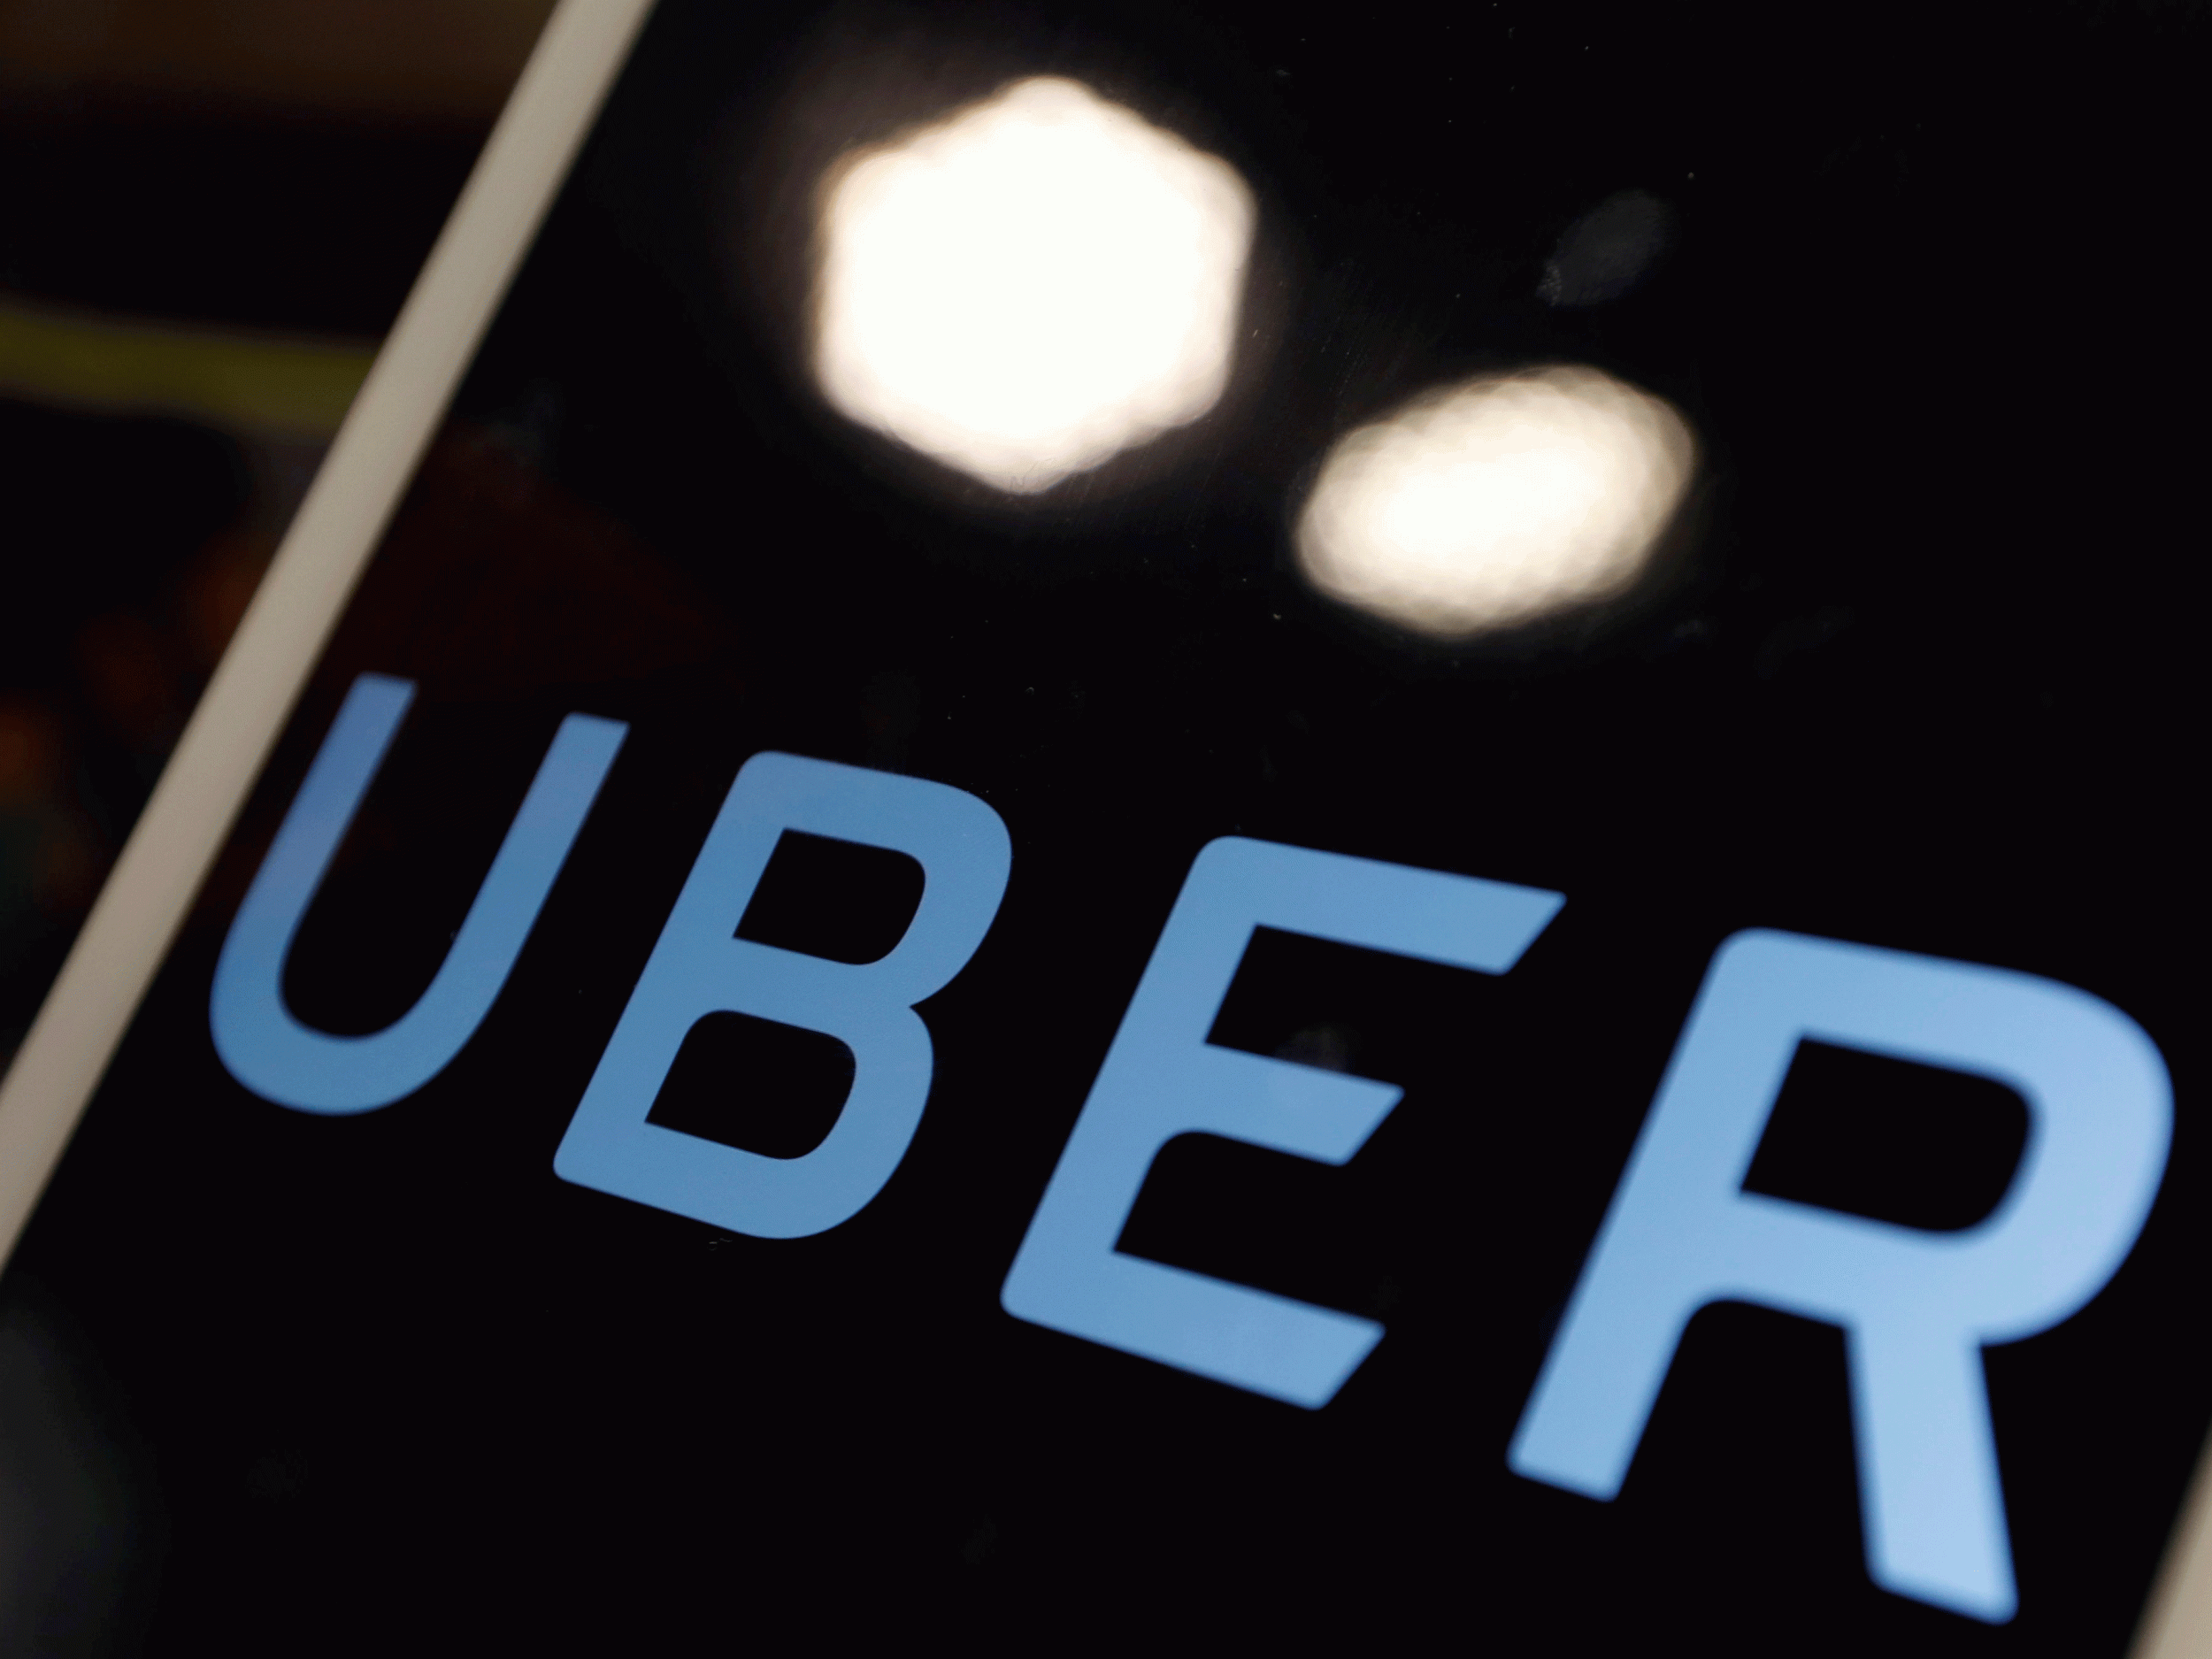 Transport for London's new license fee structure will hit Uber